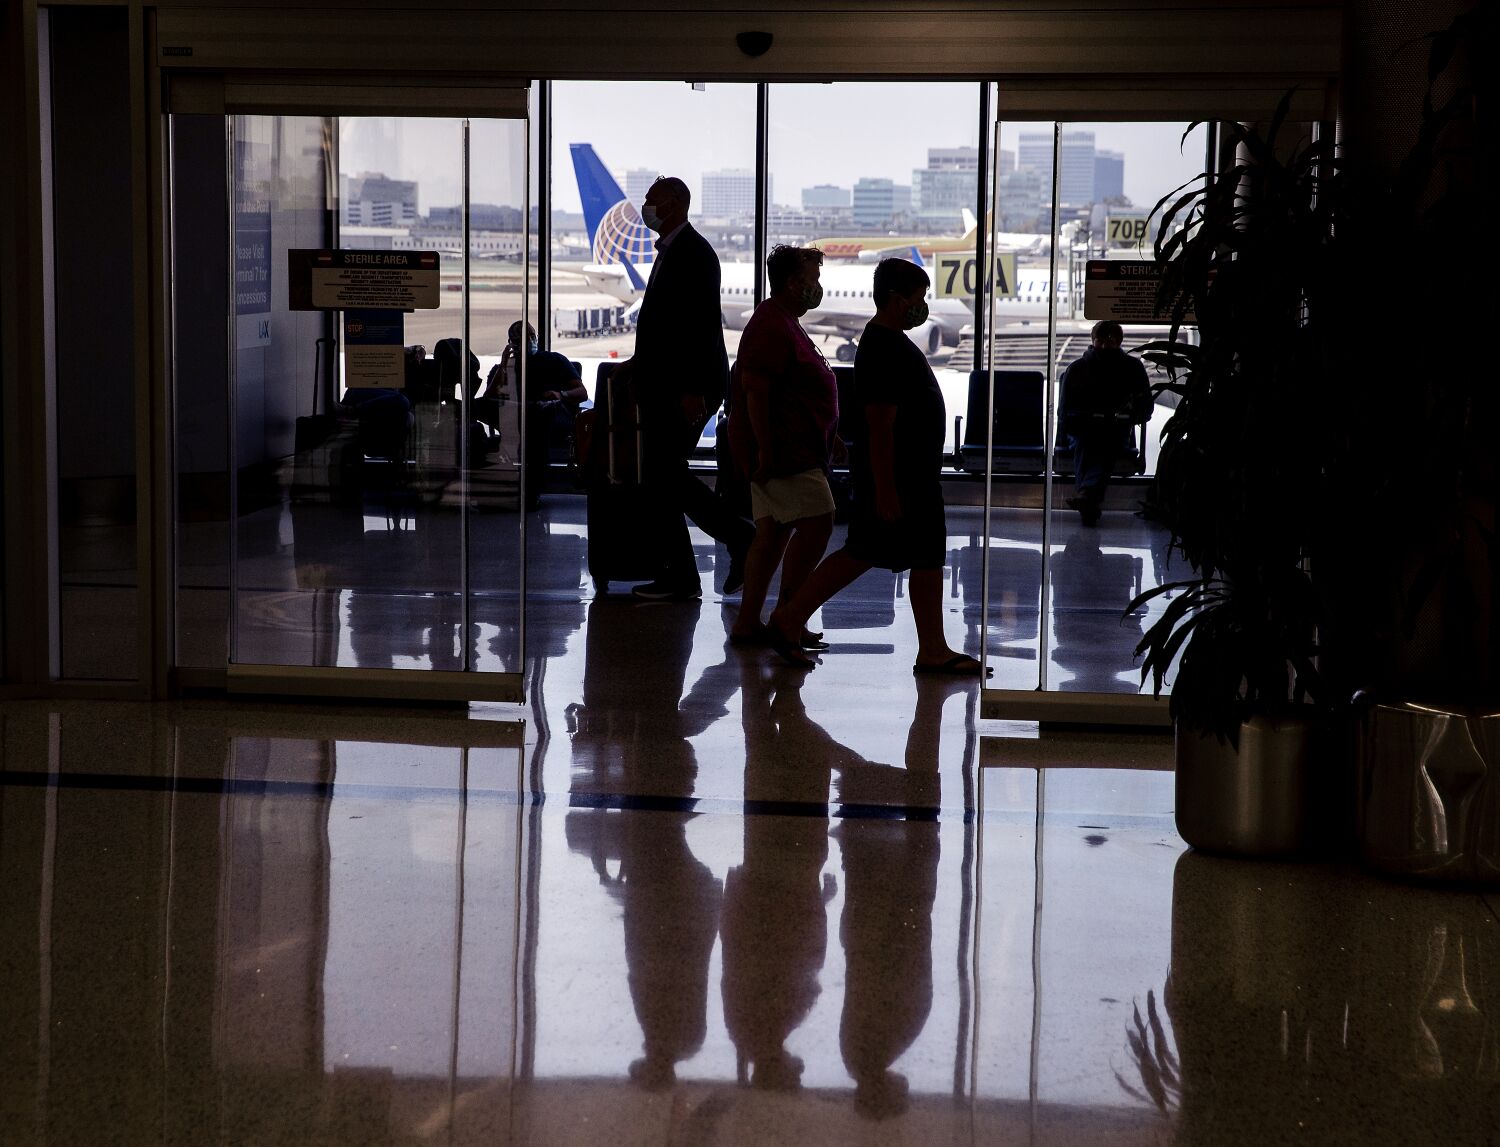 LAX power outage halts security screening, delays flights and traps some travelers